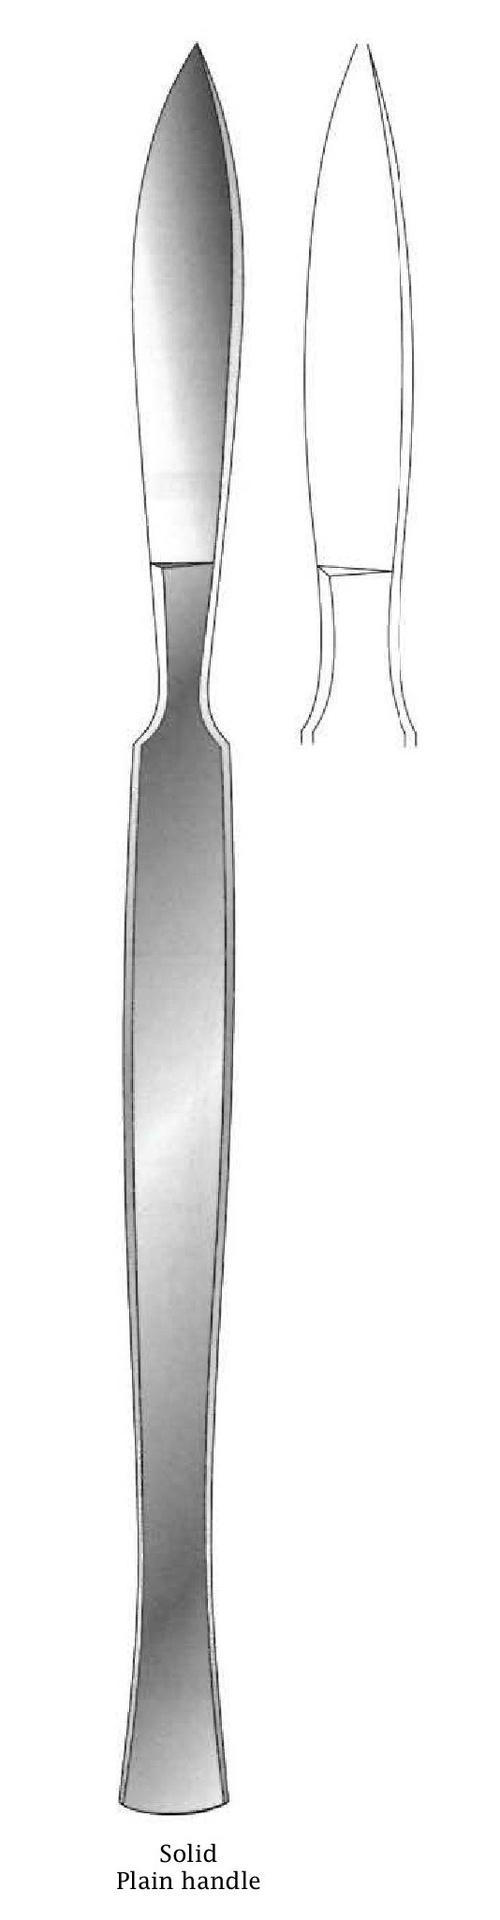 [IU-00274]  Dissection knife, solid with smooth handle, Figure 10 - Length = 17 cm / 6-3 / 4 &quot;